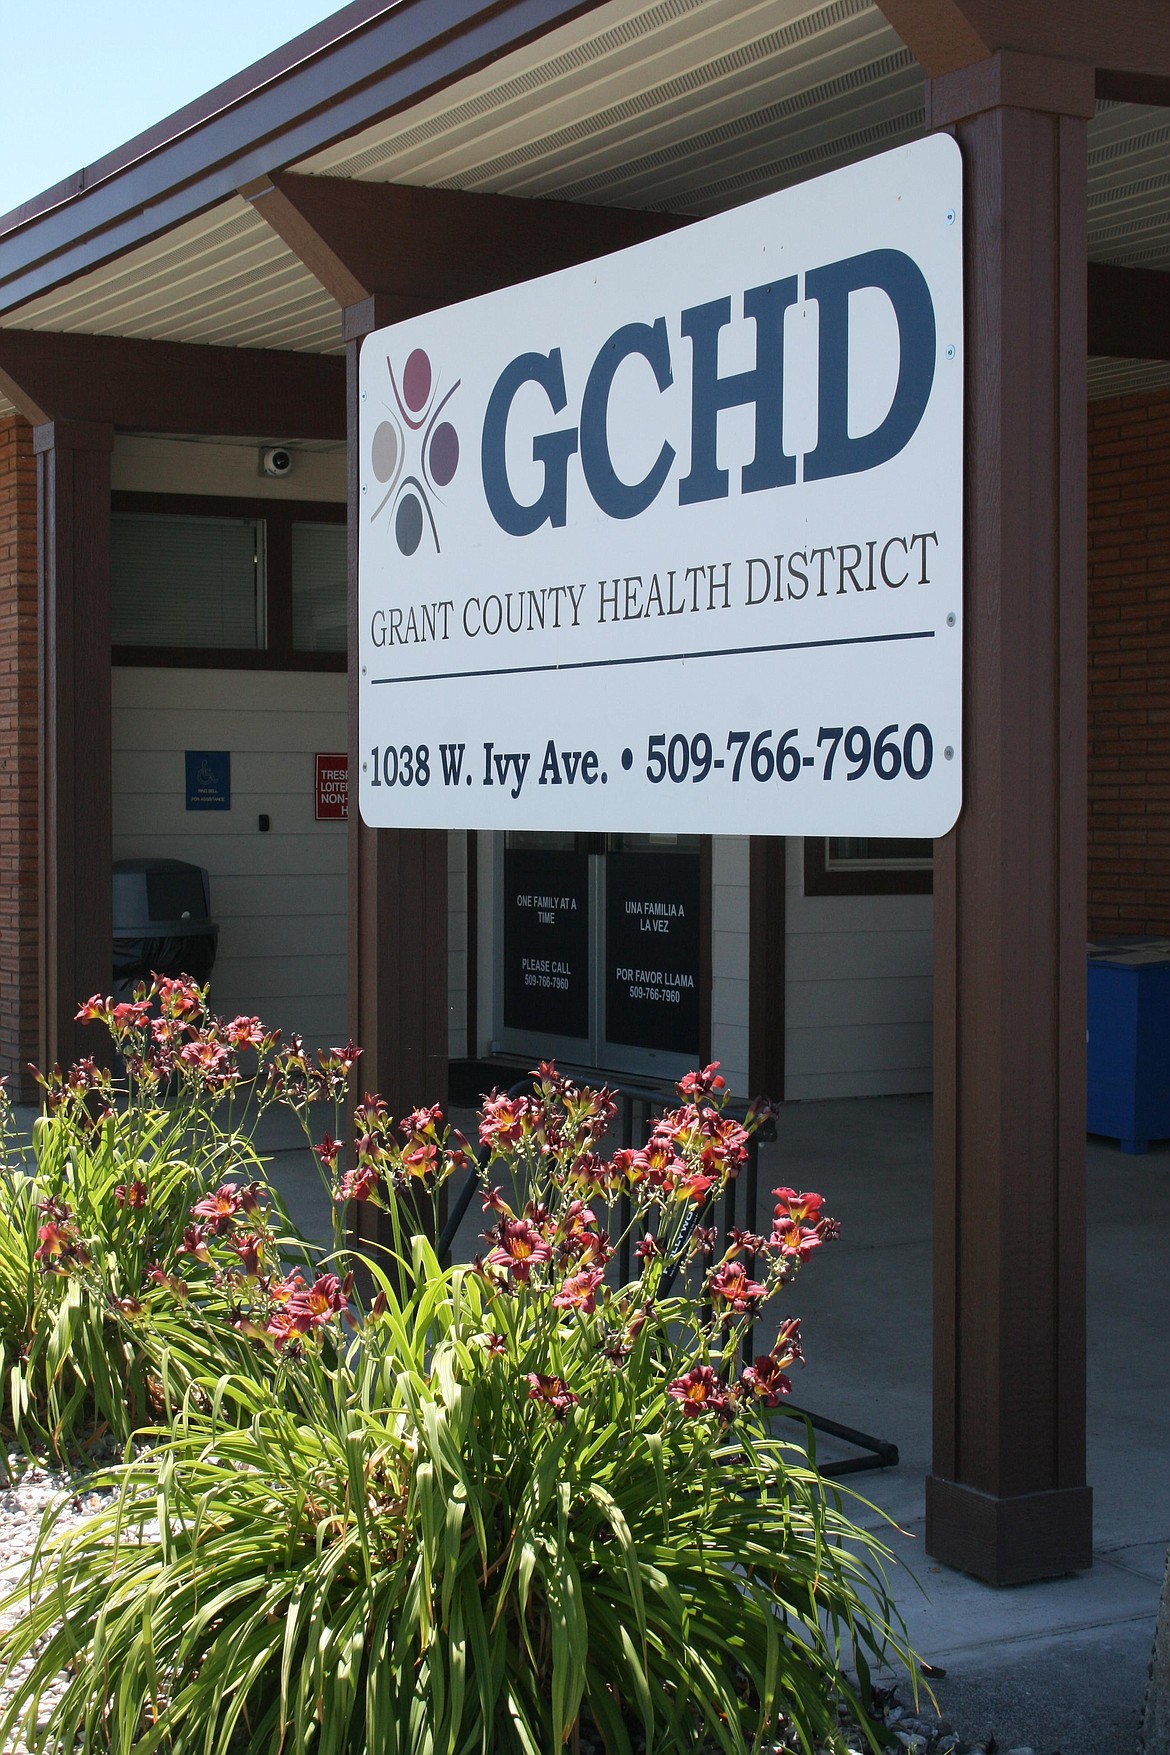 Changes in state law have required expanding and making changes to the Grant County Board of Health, which oversees the Grant County Health District (pictured).